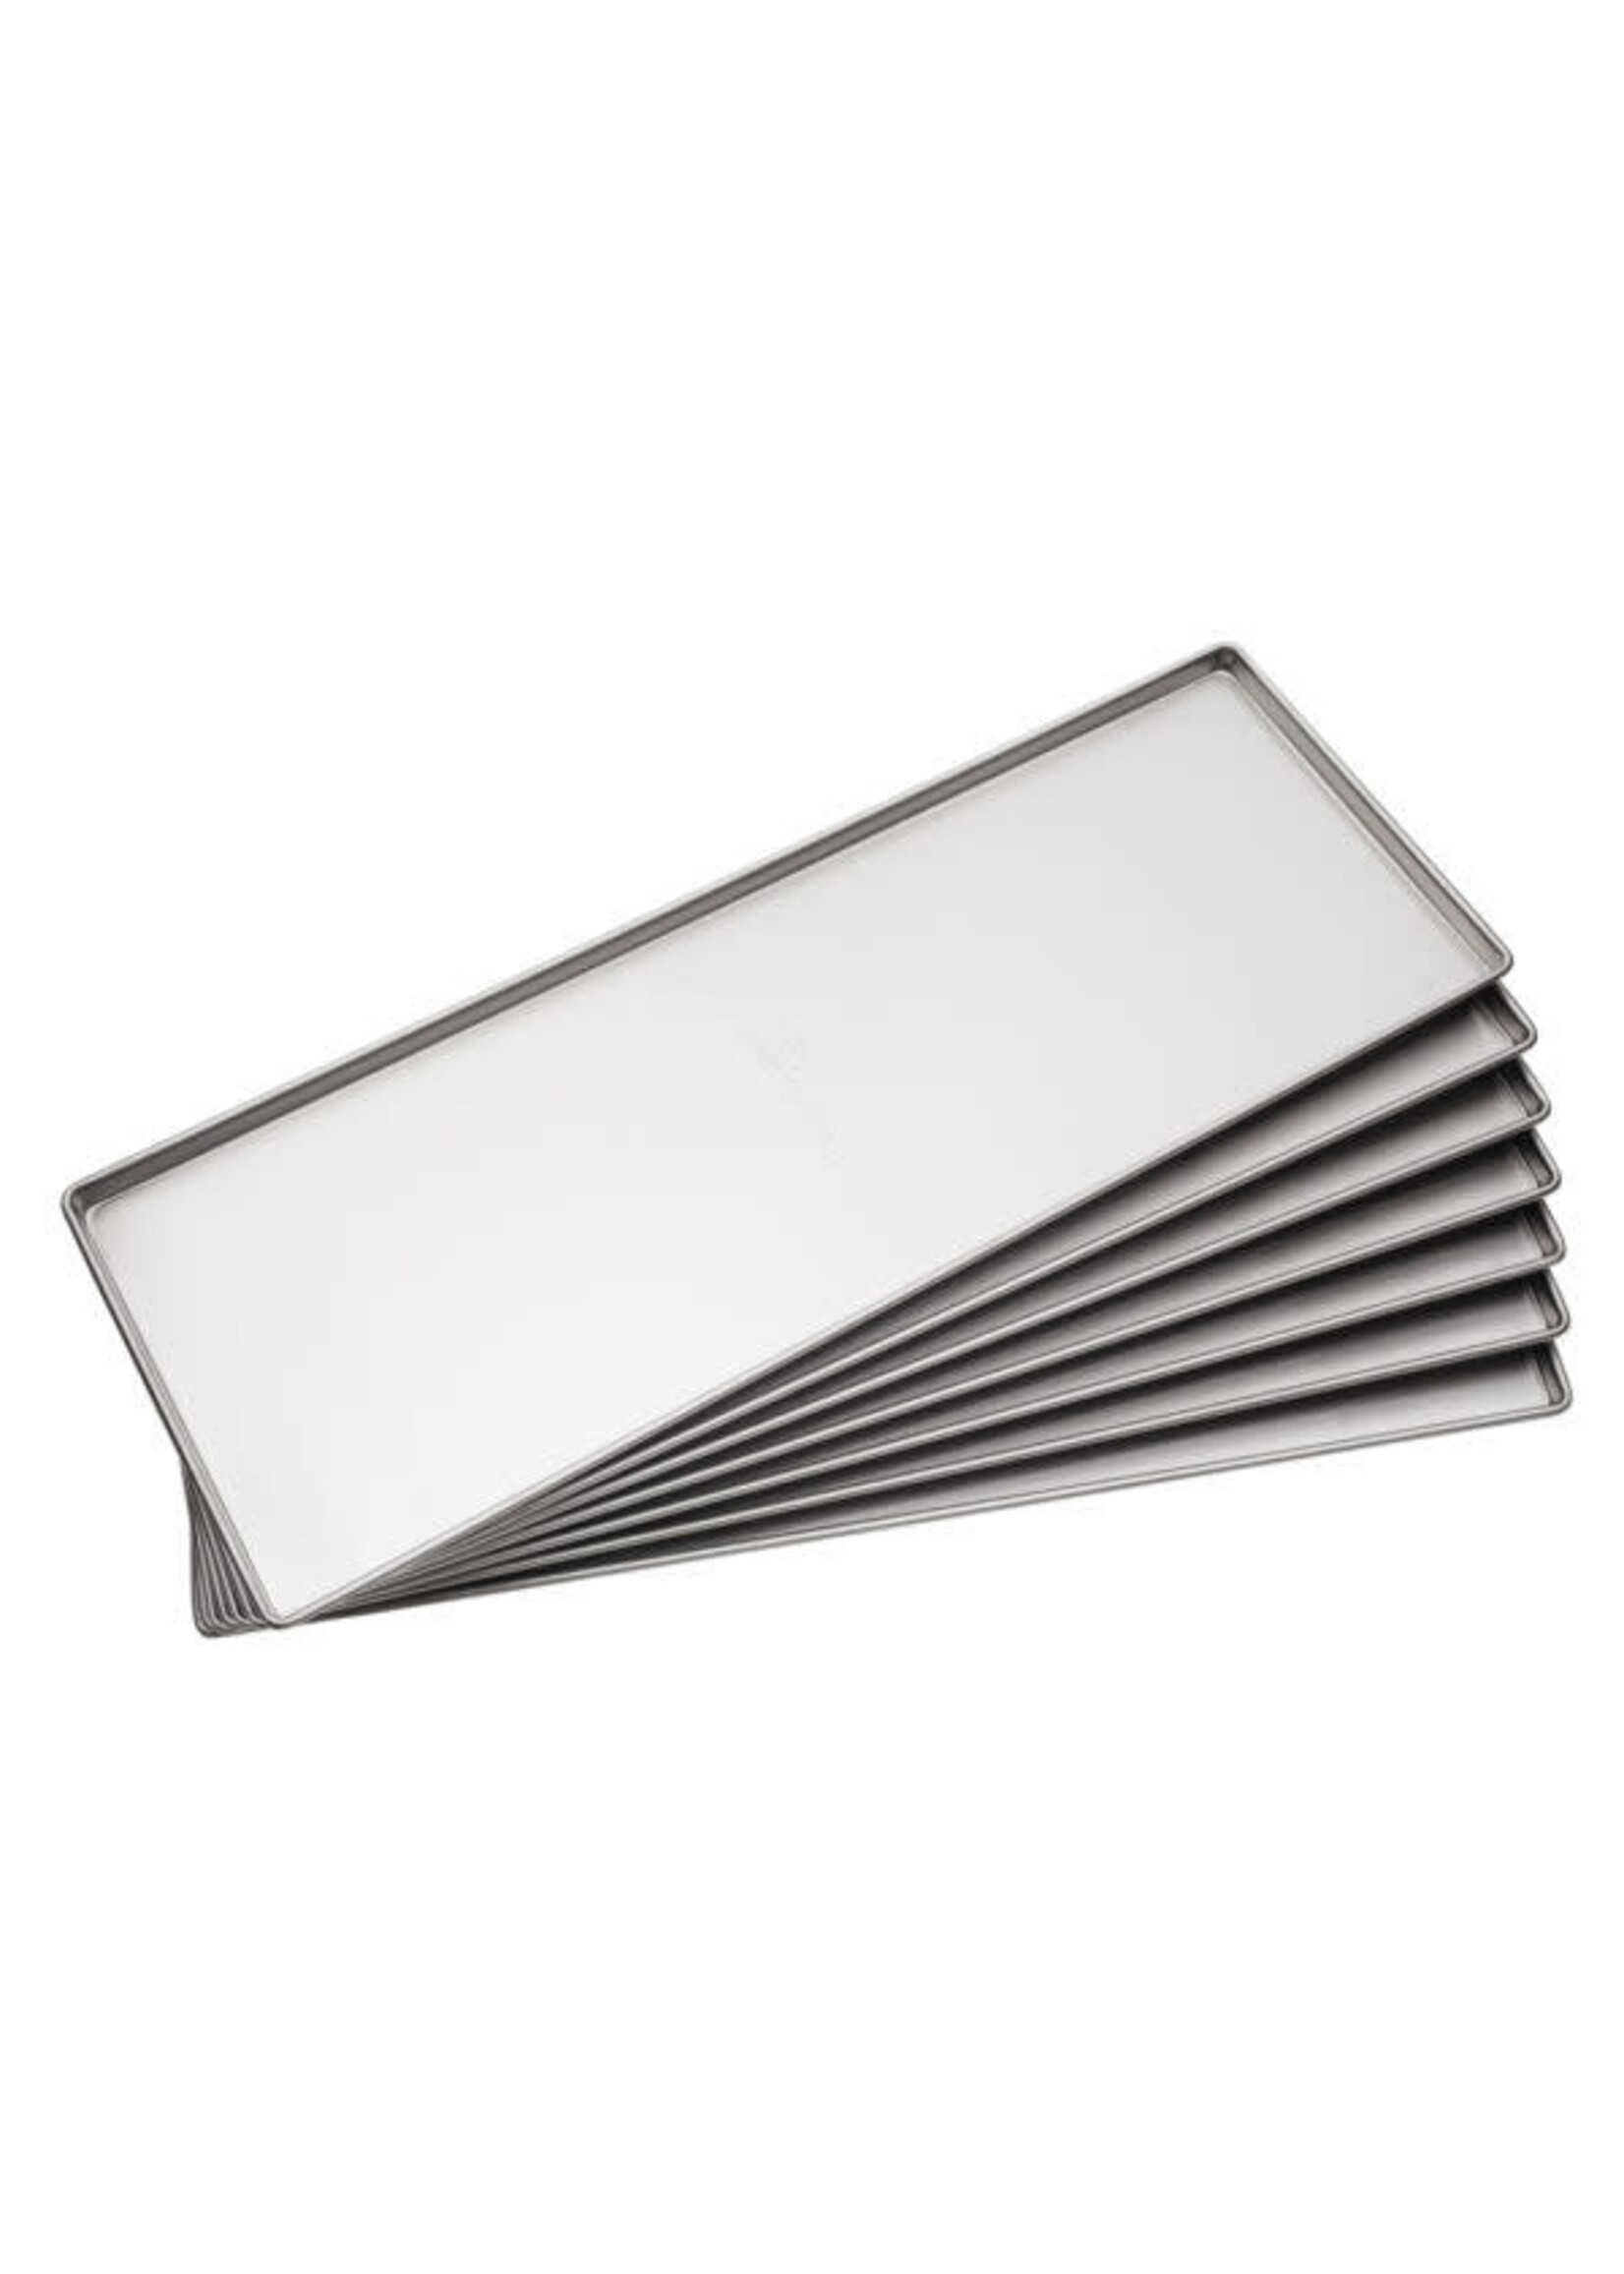 Harvest Right Harvest Right X-Large Stainless Steel Trays Set of 7